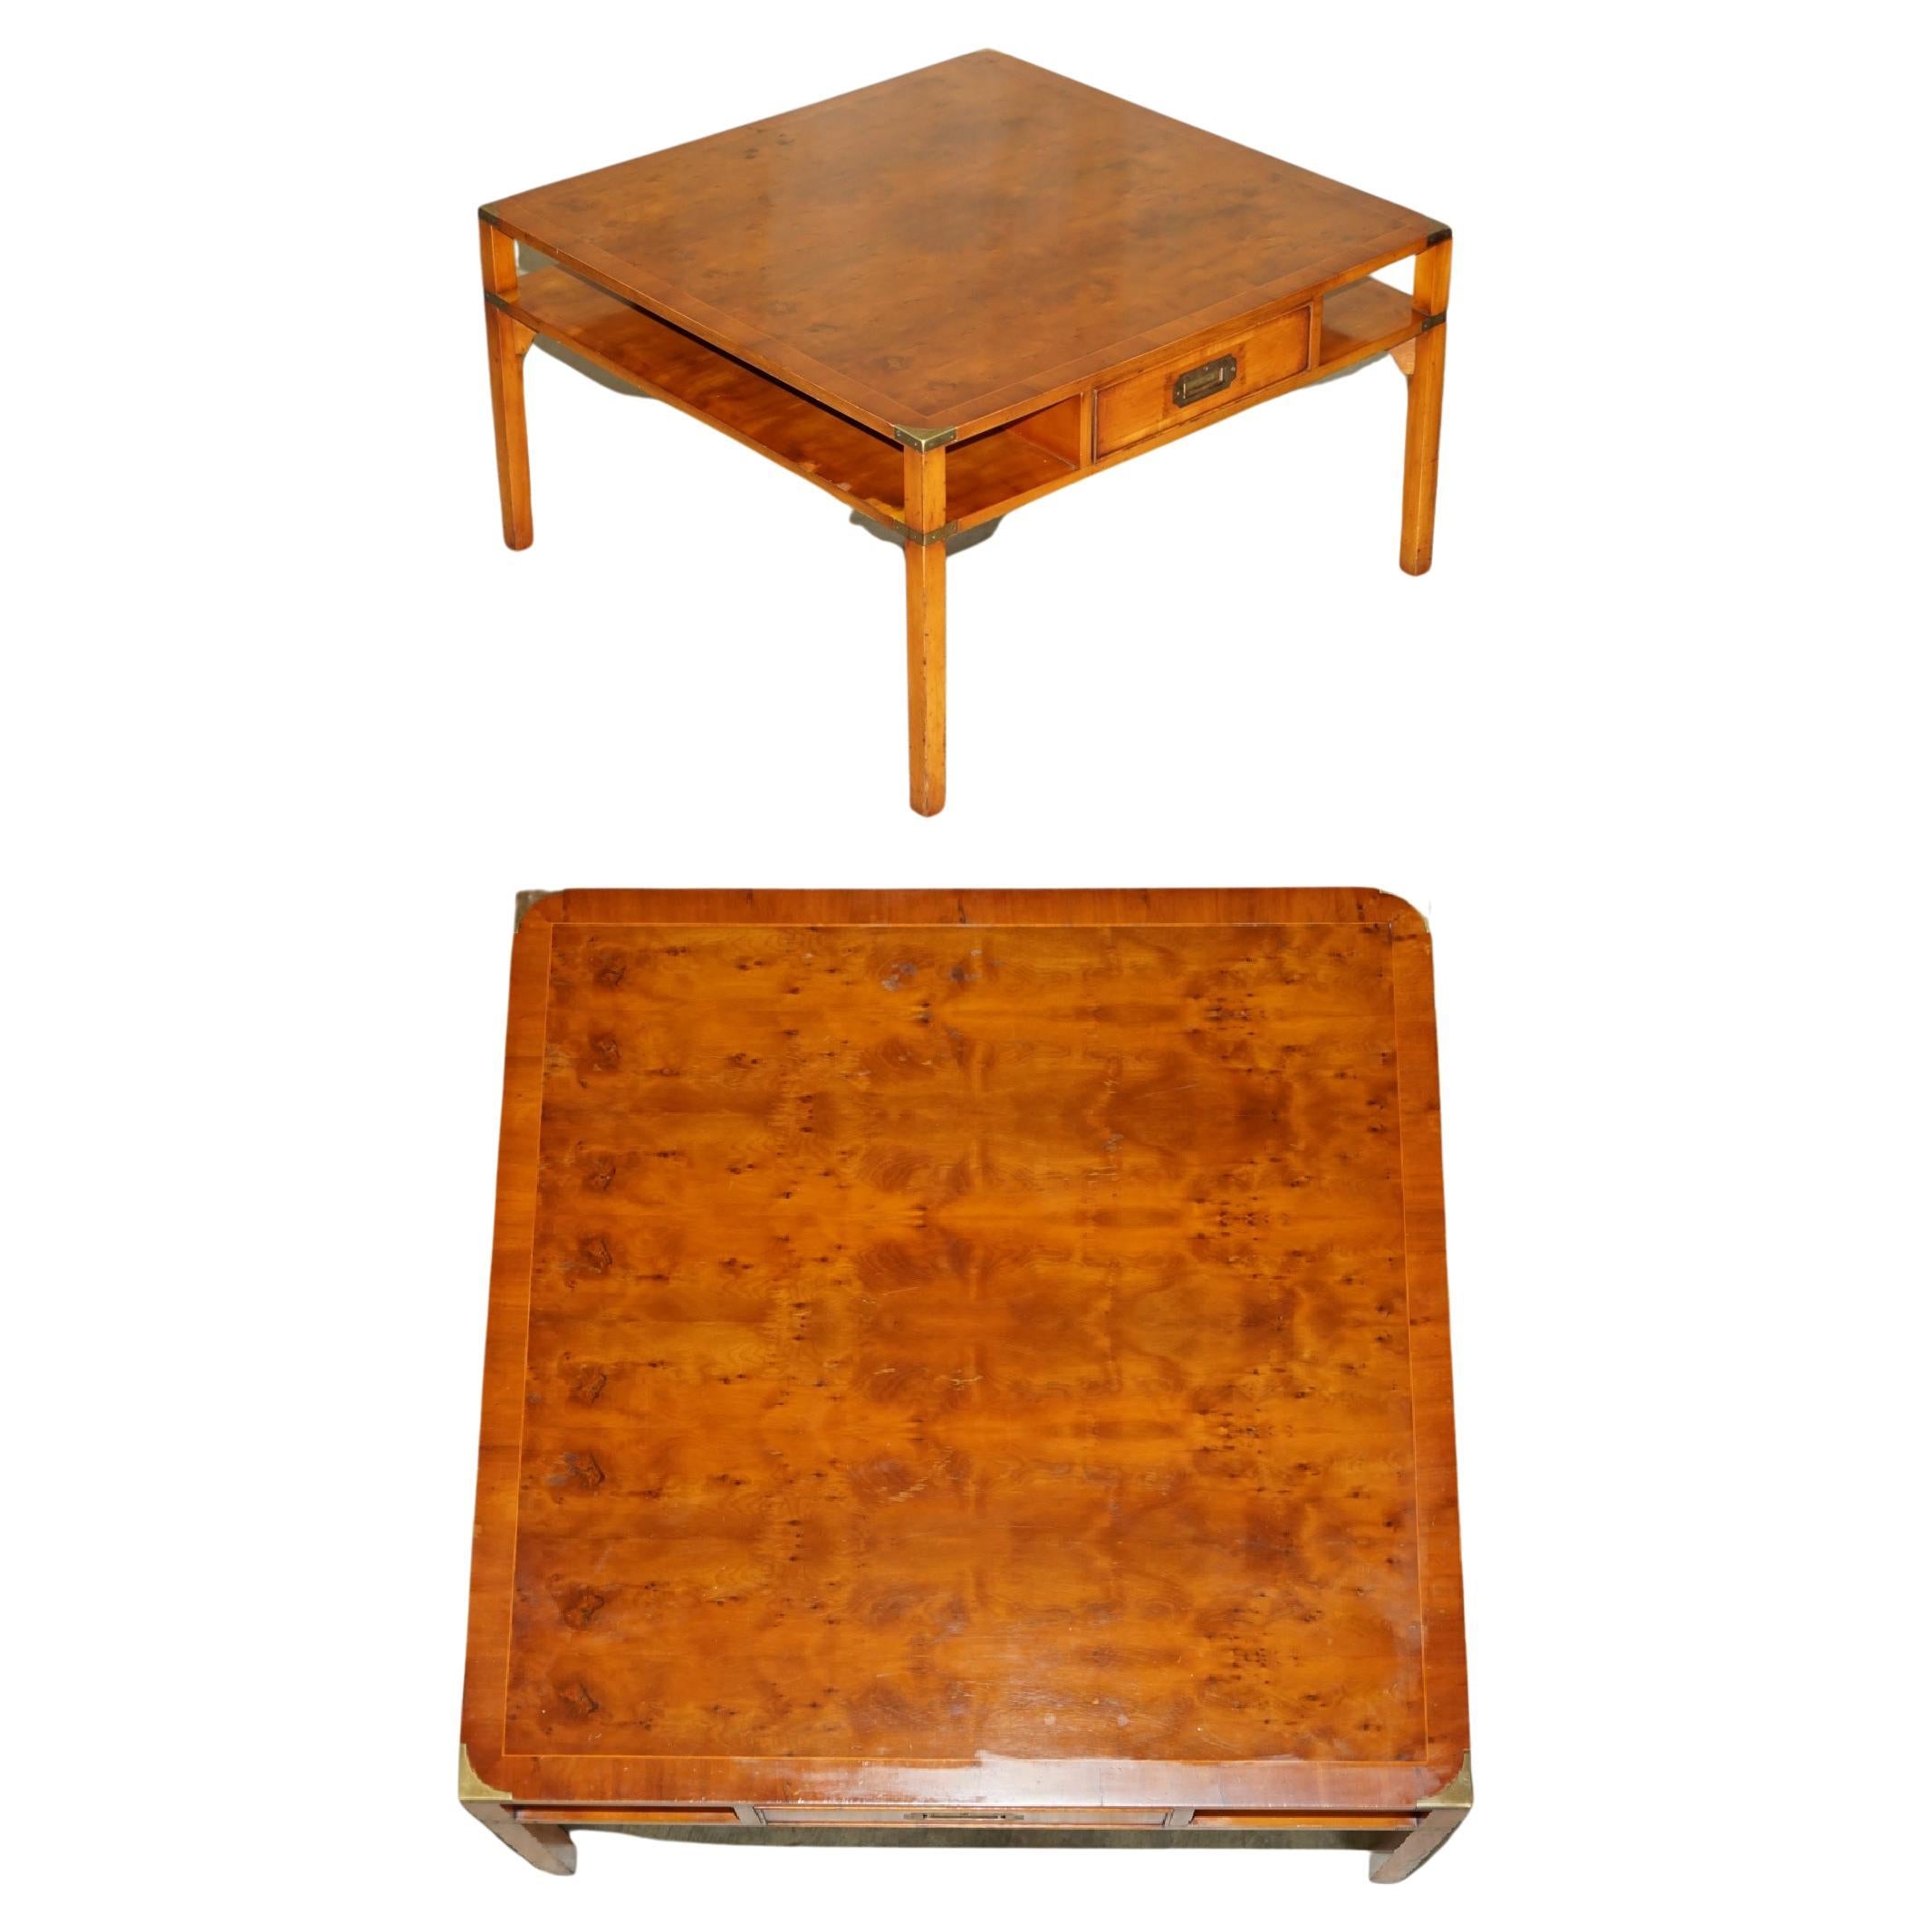 Sublime Vintage Military Campaign Burr Yew Wood Coffee Table with Book Shelf For Sale